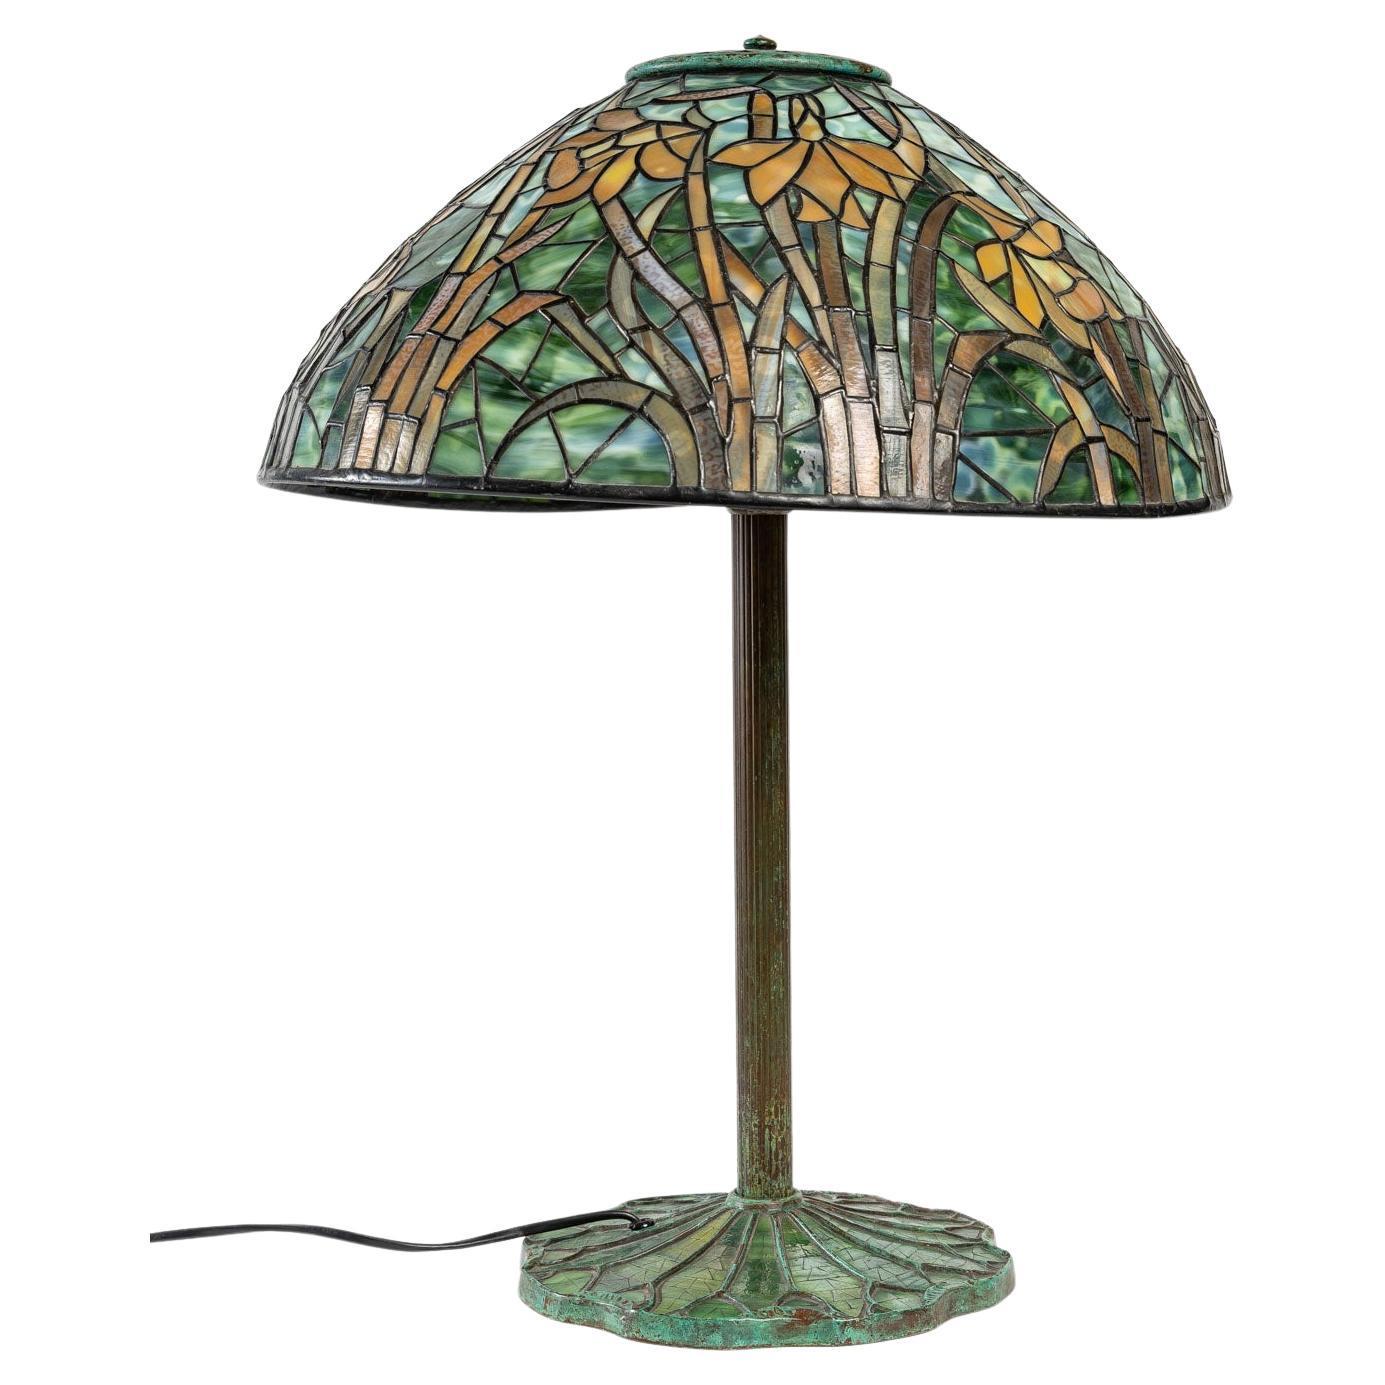 Lamp in the Tiffany taste, 20th century
A Tiffany style lamp in bronze and glass, 20th century.
H: 55 cm, d: 42 cm